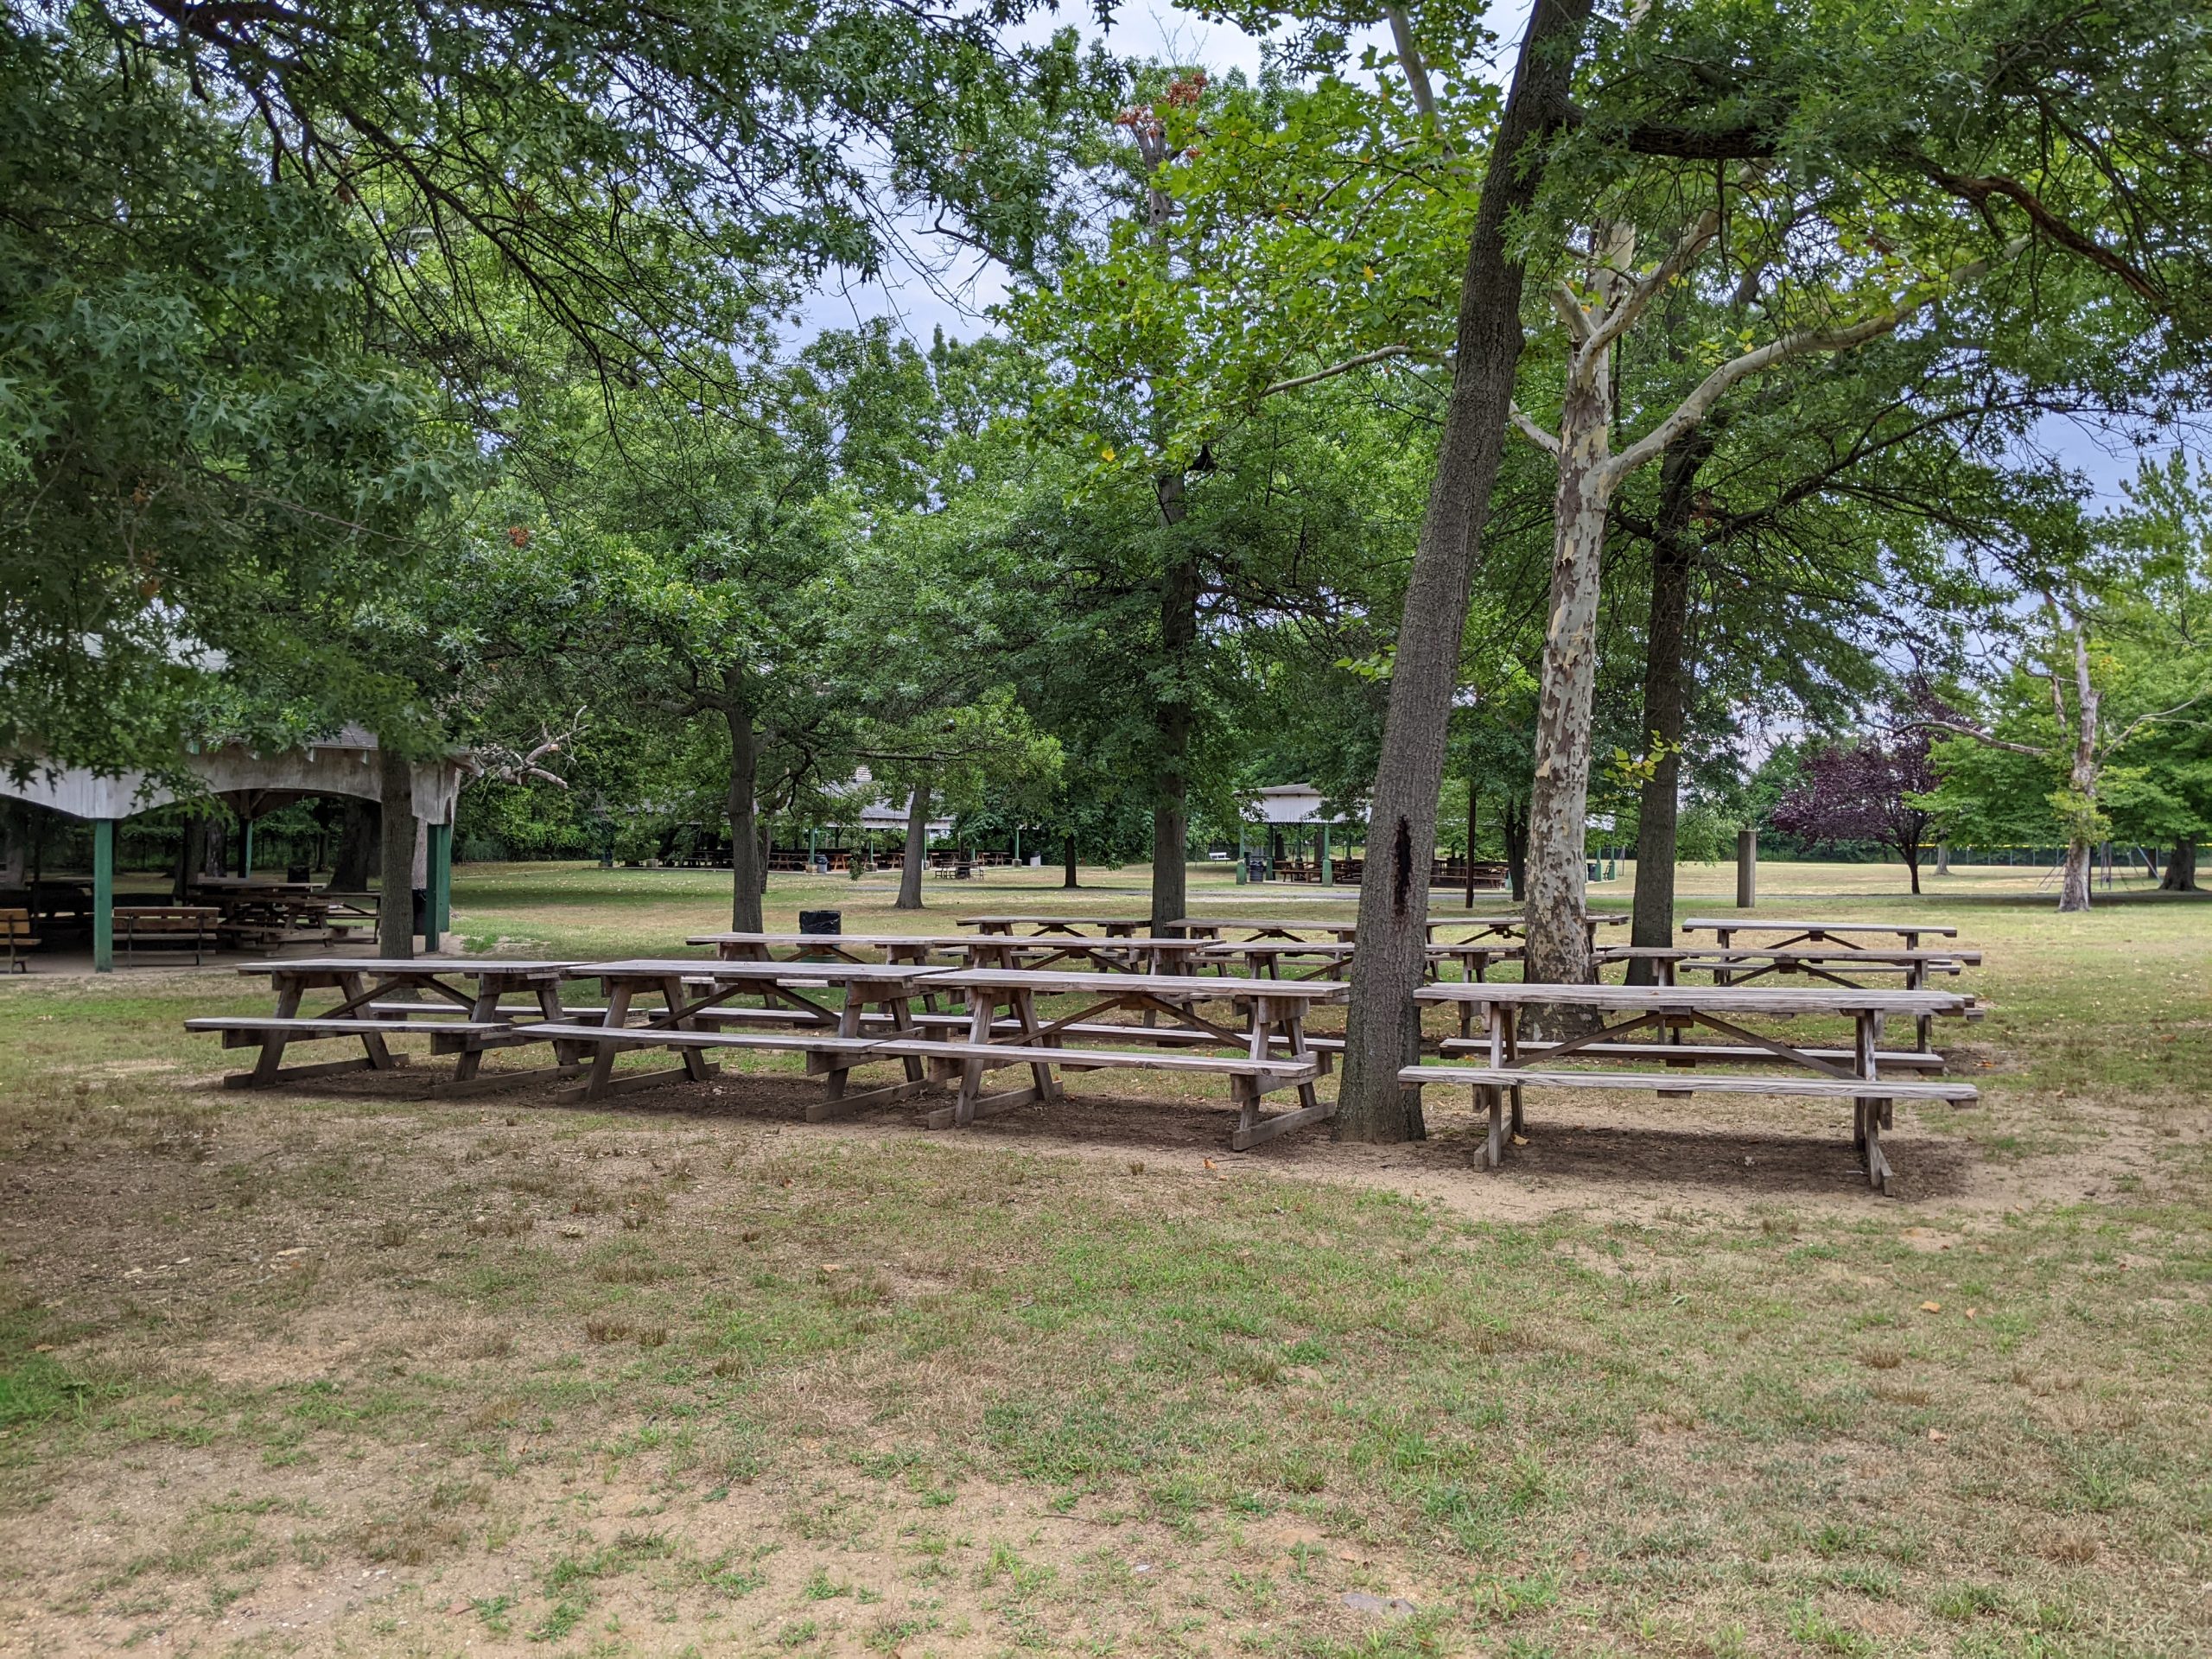 Soupy Island in Deptford NJ - Picnic benches USE